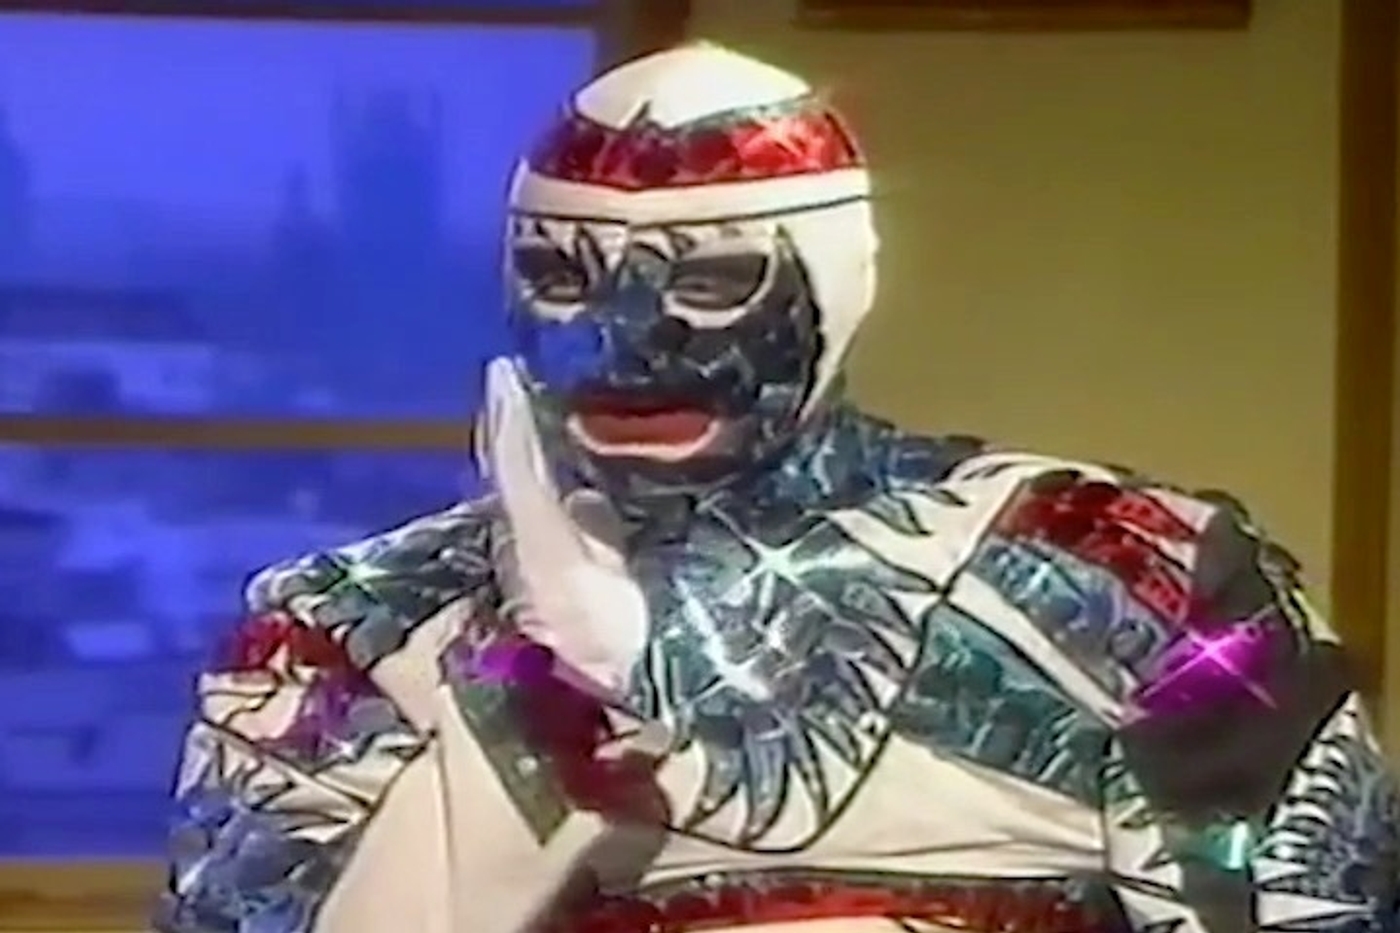 Original footage from The Legend of Leigh Bowery documentary by © Charles Atlas (11/11)